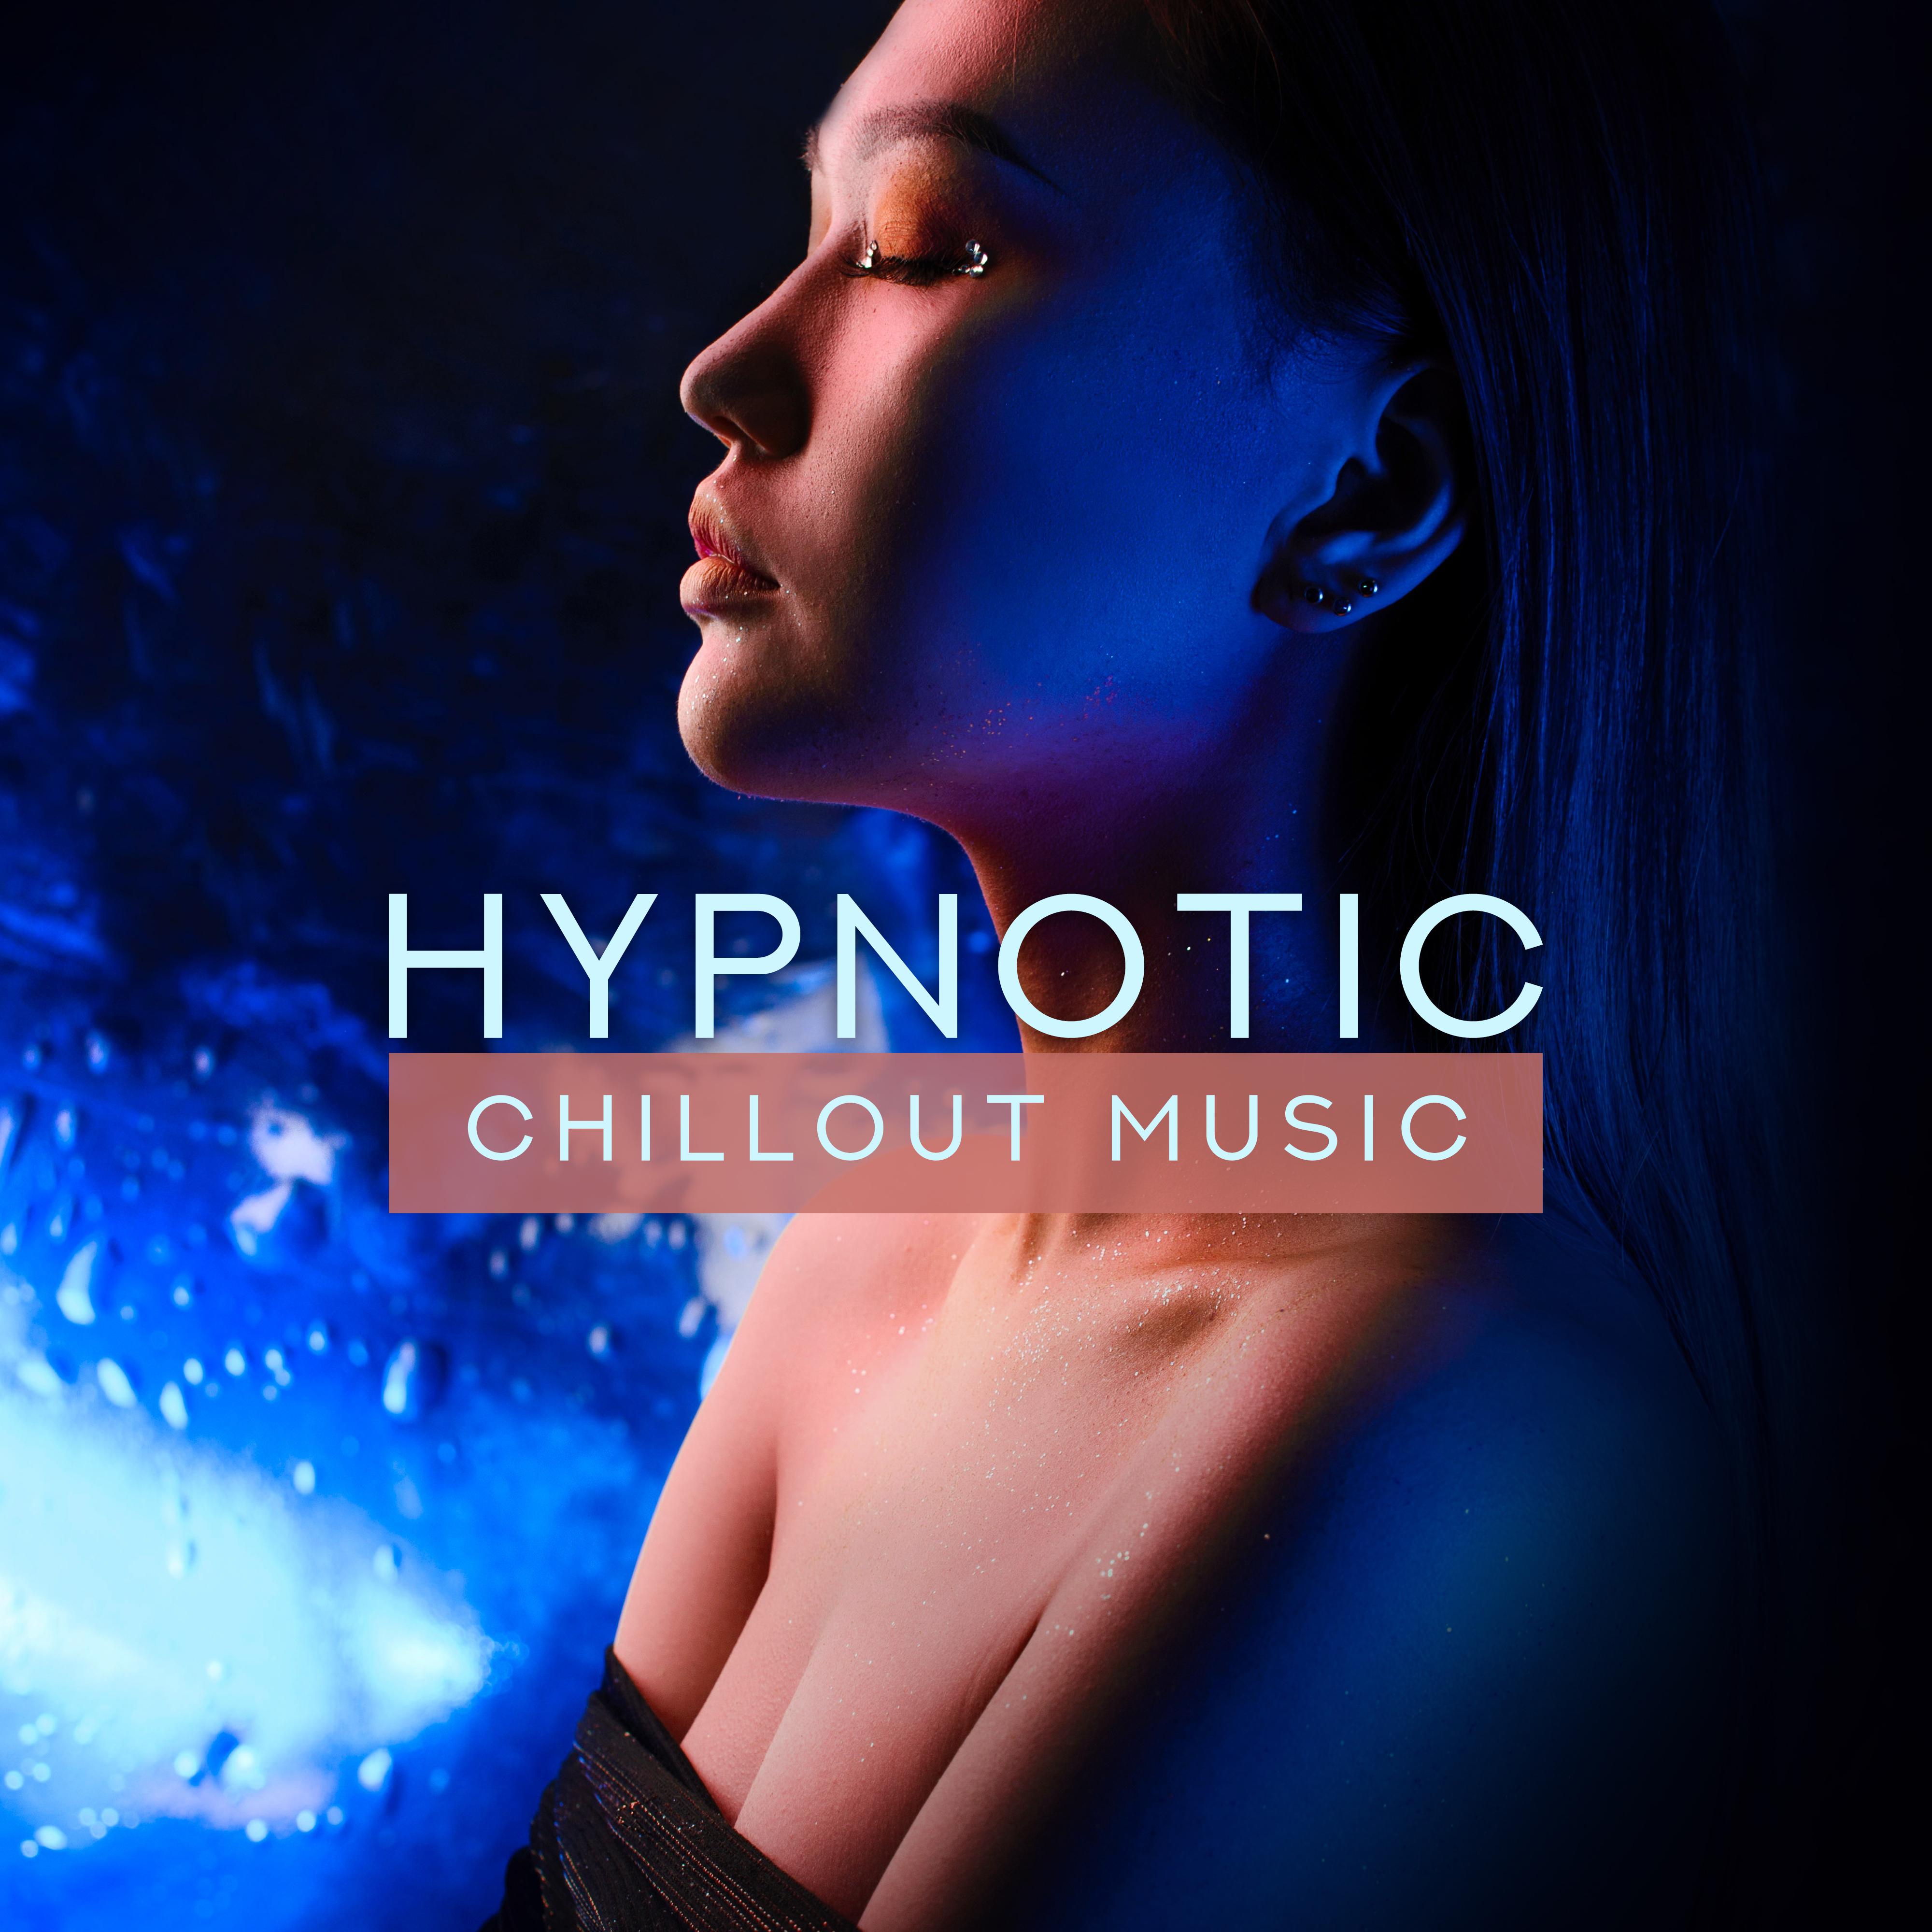 Hypnotic Chillout Music